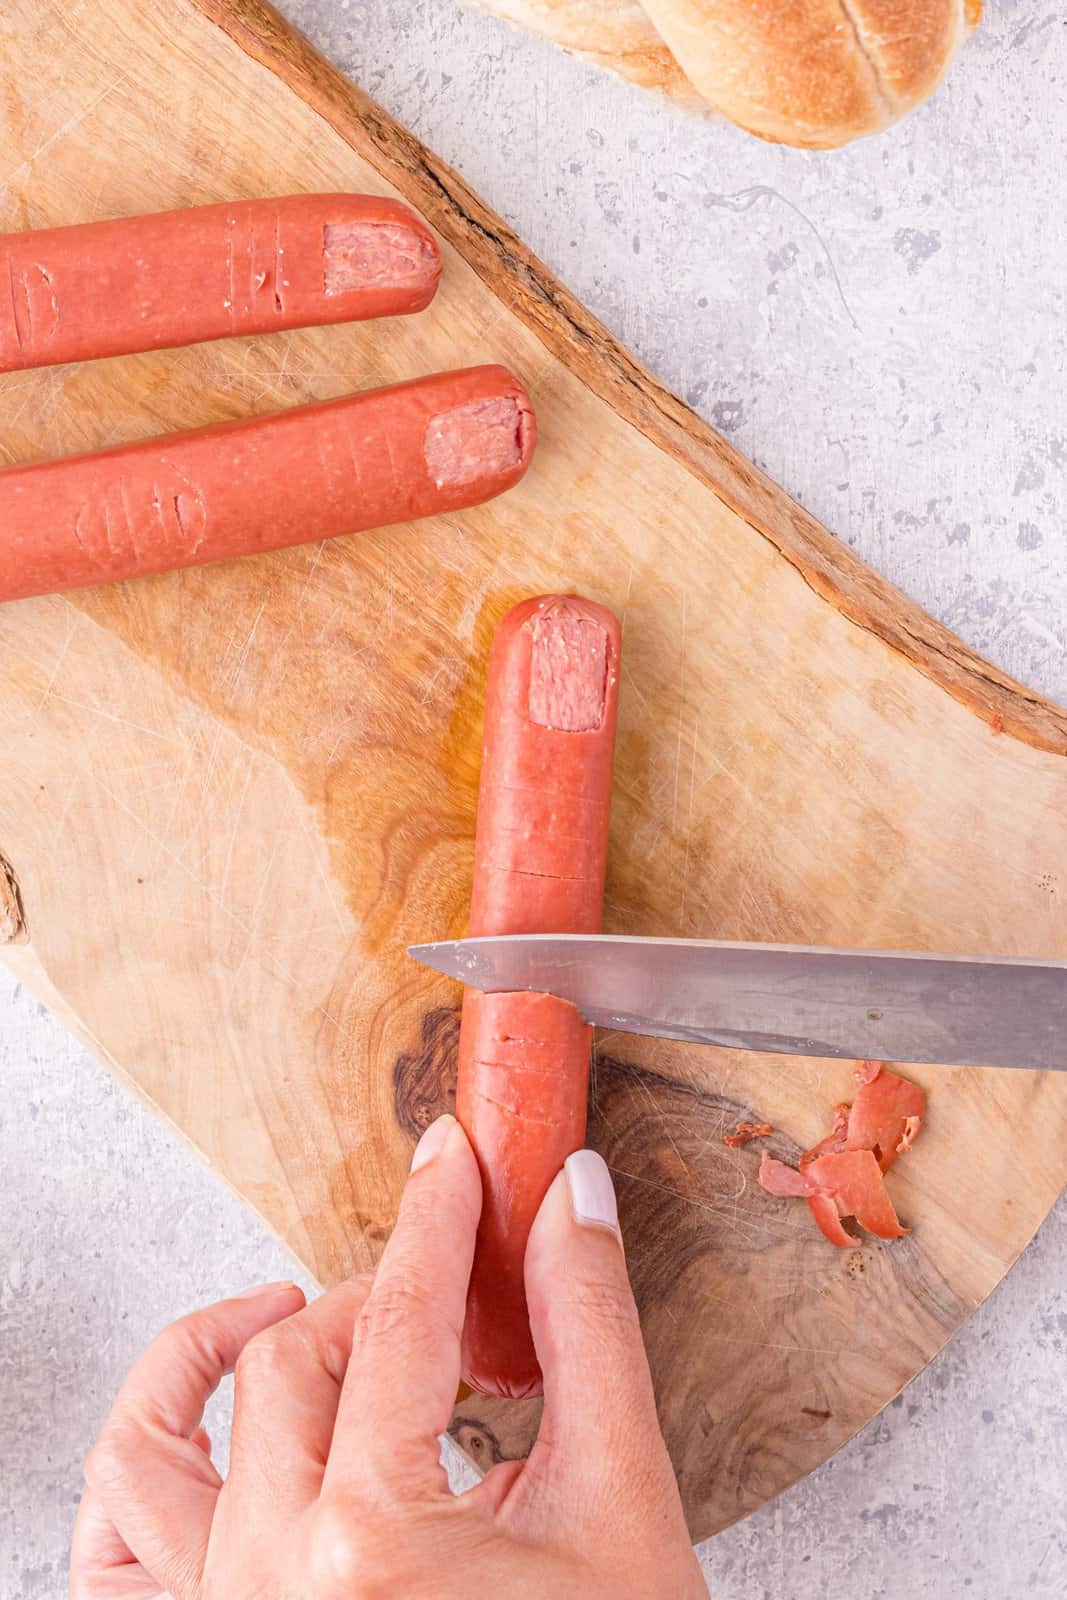 Knife cutting the lower knuckle creases in the hot dog.